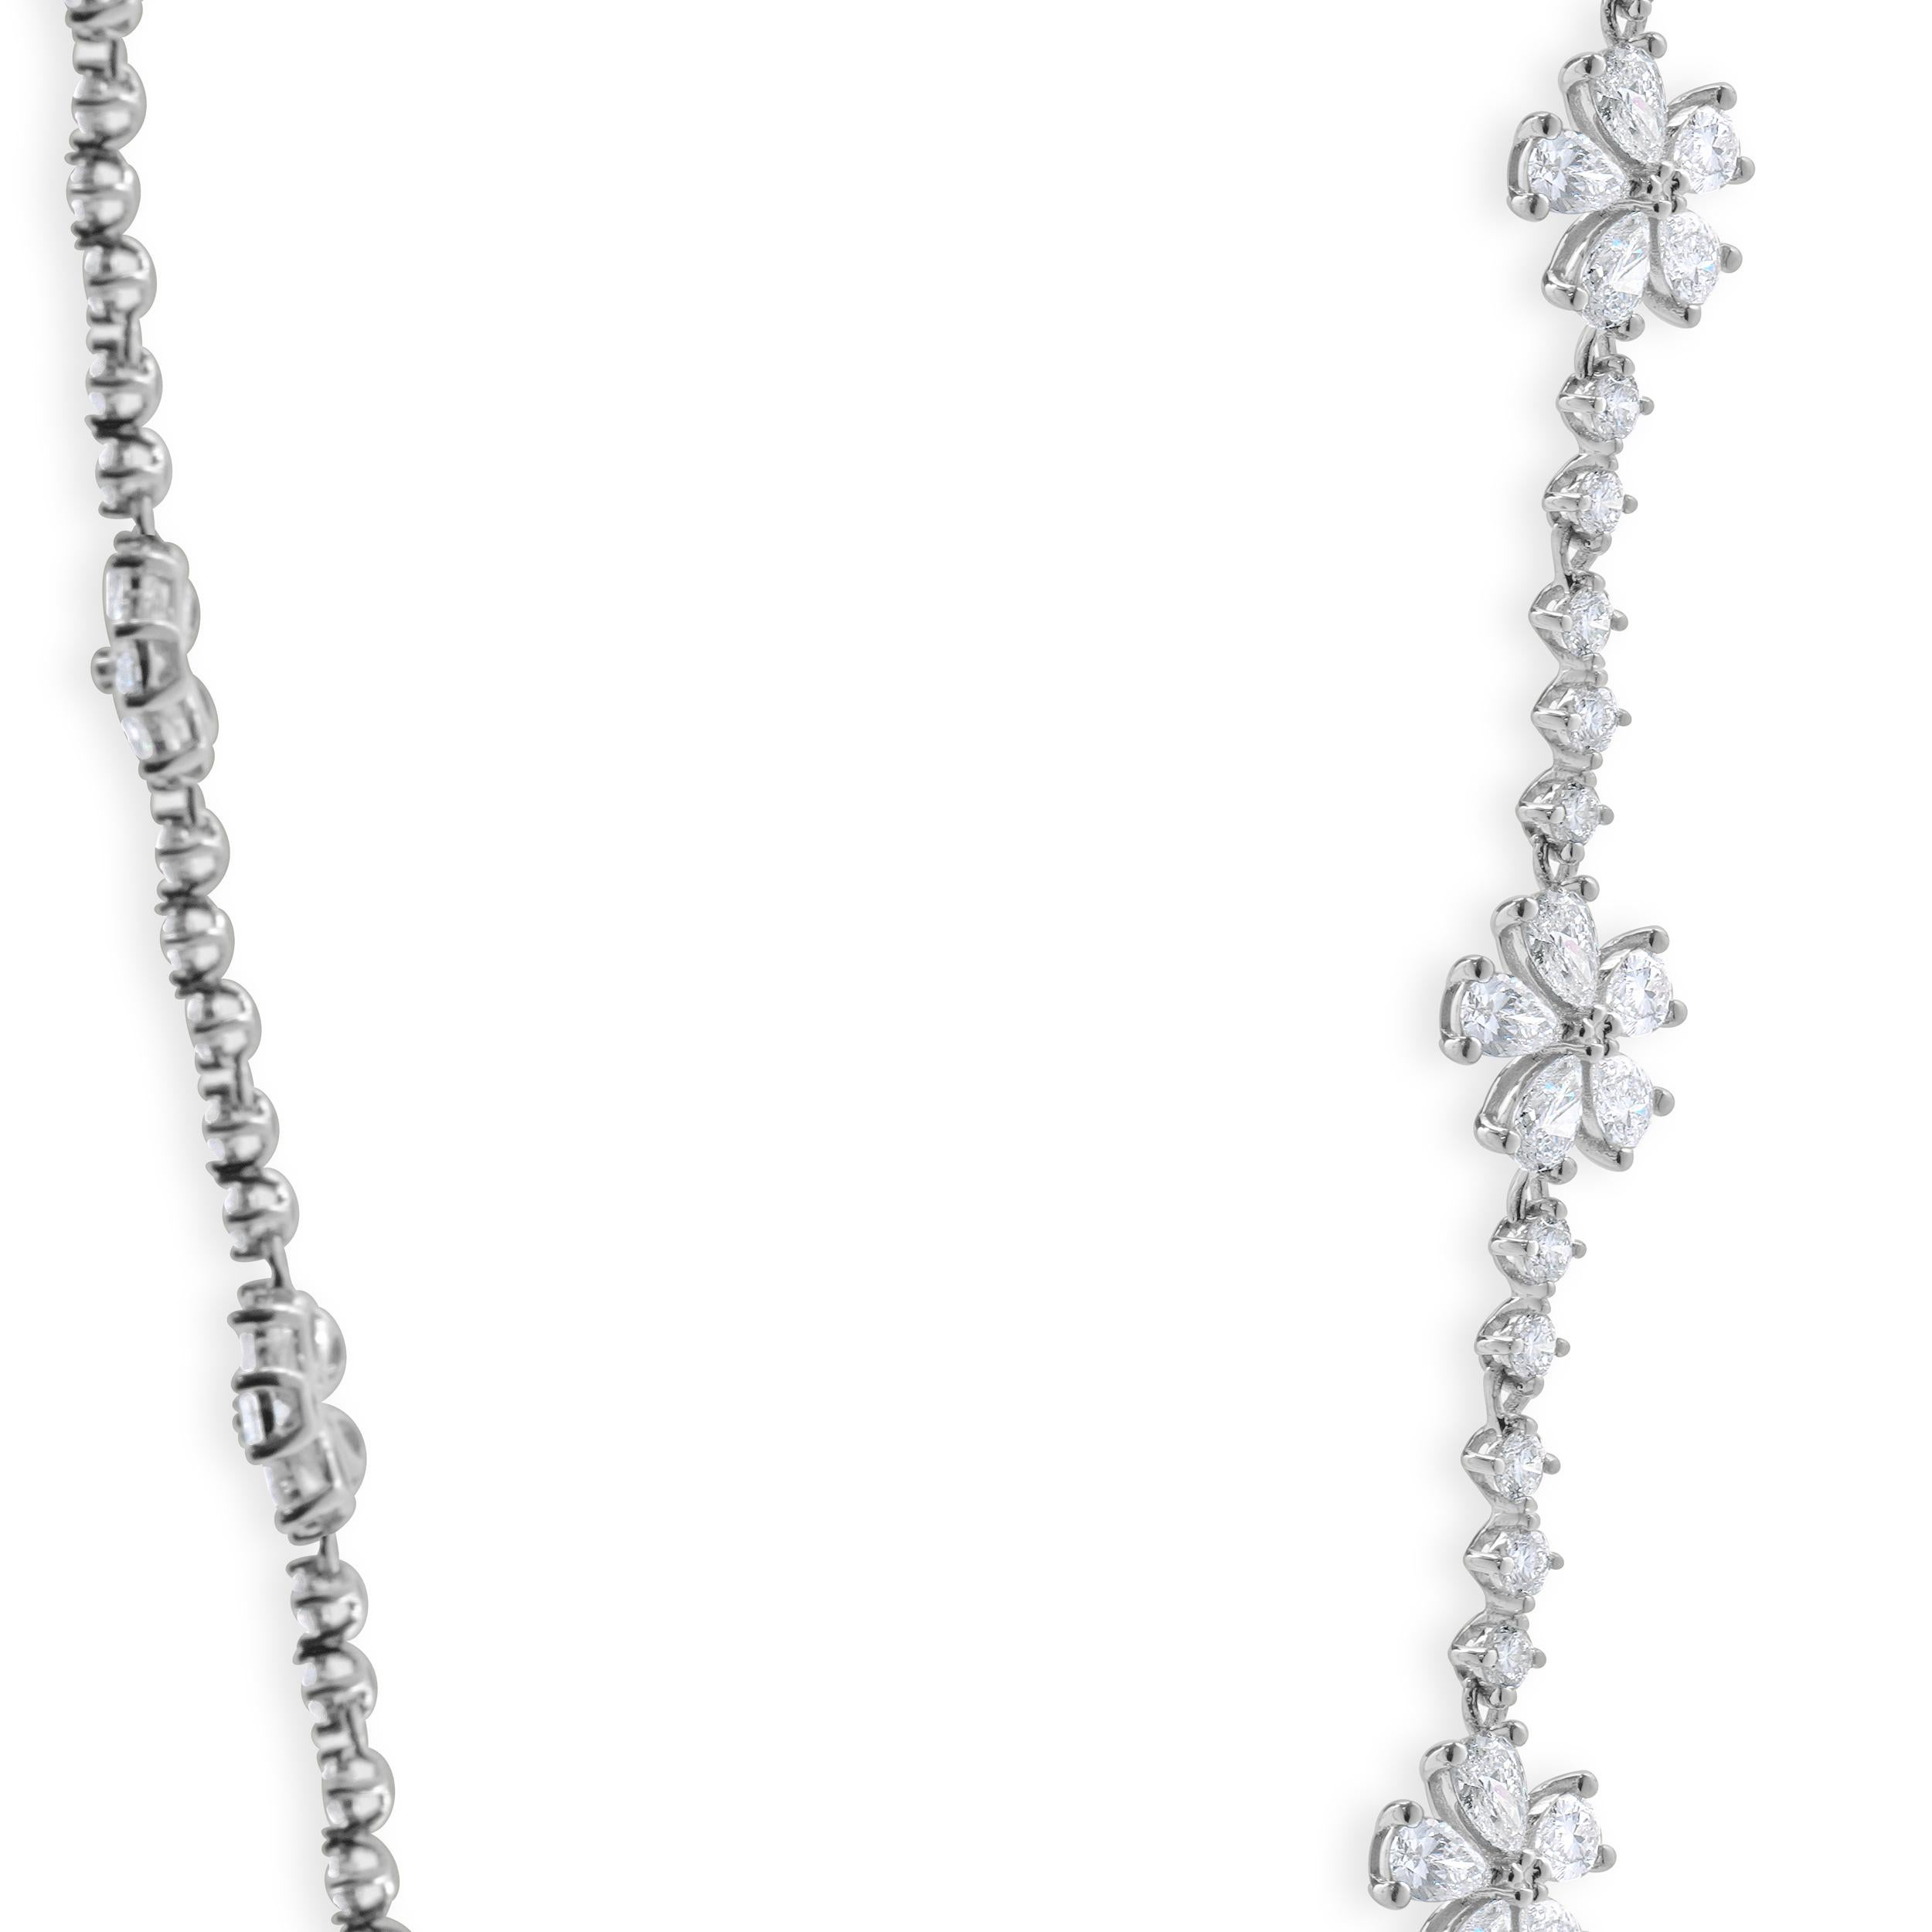 Designer: custom
Material: 18K white gold
Diamonds: 40 round brilliant cut = 1.53cttw
Color: G 
Clarity: VS1-2
Diamonds: 45 pear cut = 4.08cttw
Color: G / H
Clarity: VS2-SI1
Dimensions: necklace measures 18-inches in length 
Weight: 19.47 grams
